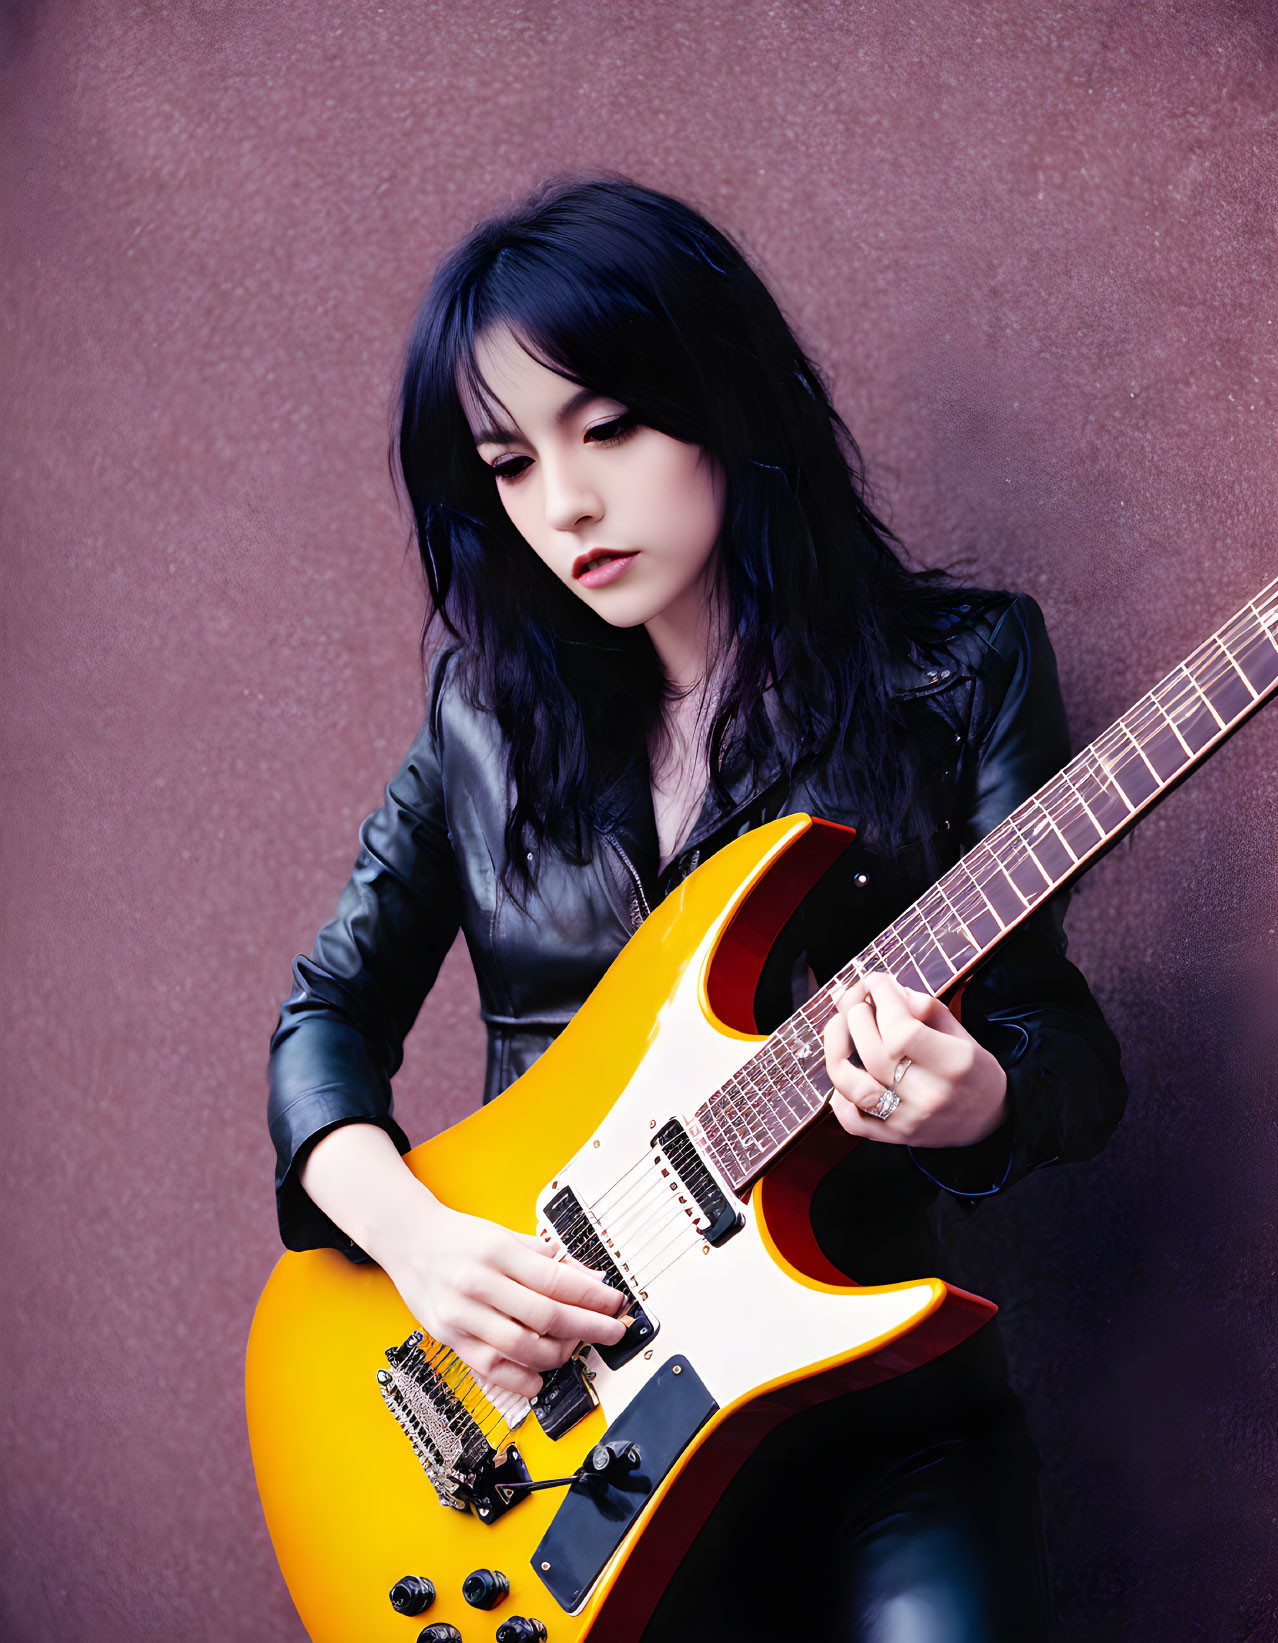 Dark-haired person in black outfit plays yellow electric guitar on maroon backdrop